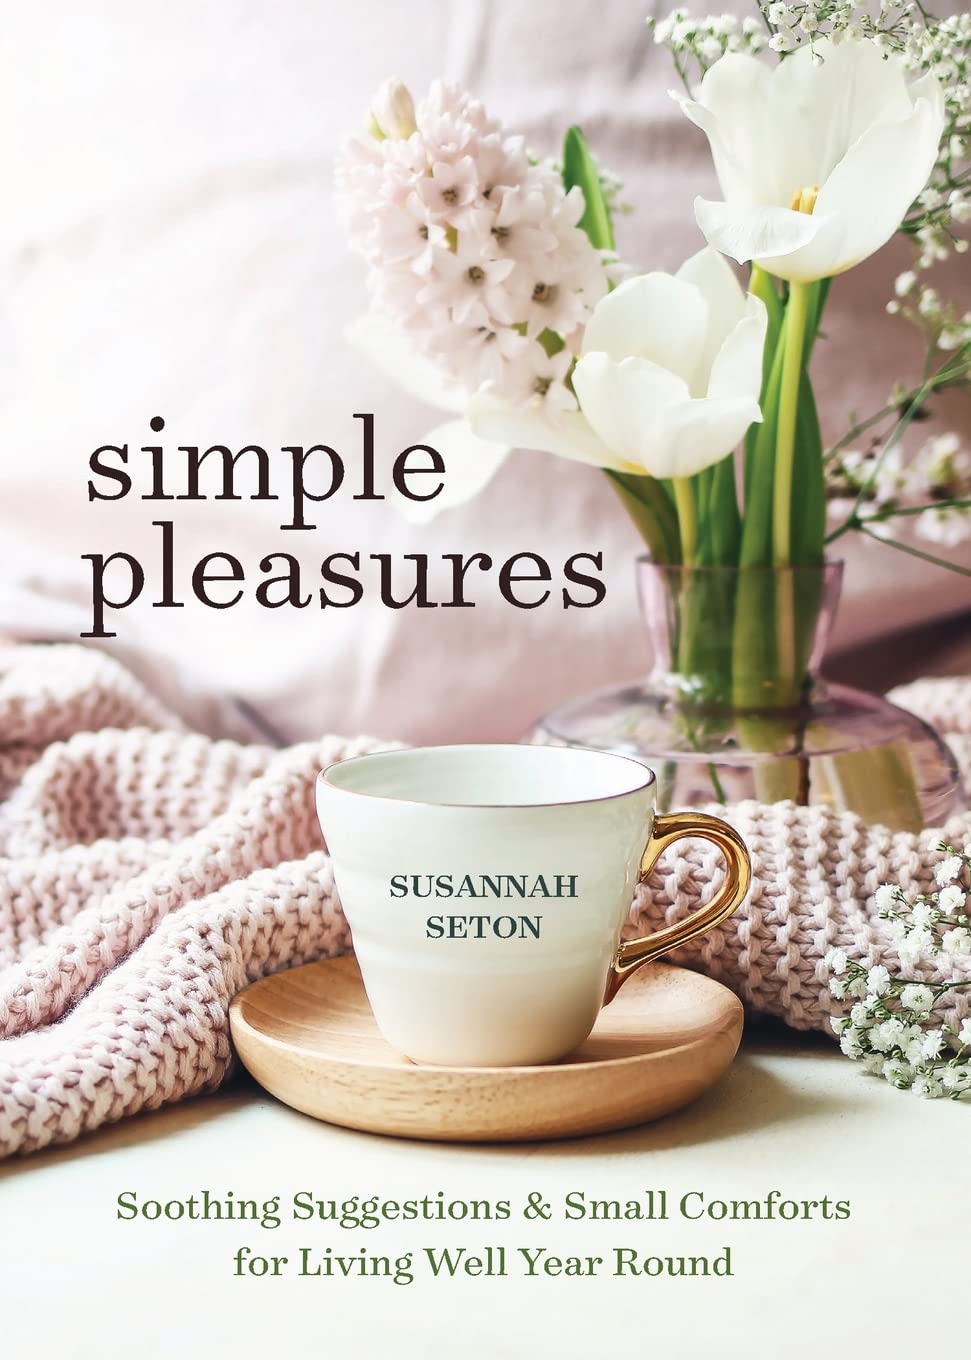 Simple Pleasures: Soothing Suggestions and Small Comforts for Living Well Year Round - SureShot Books Publishing LLC